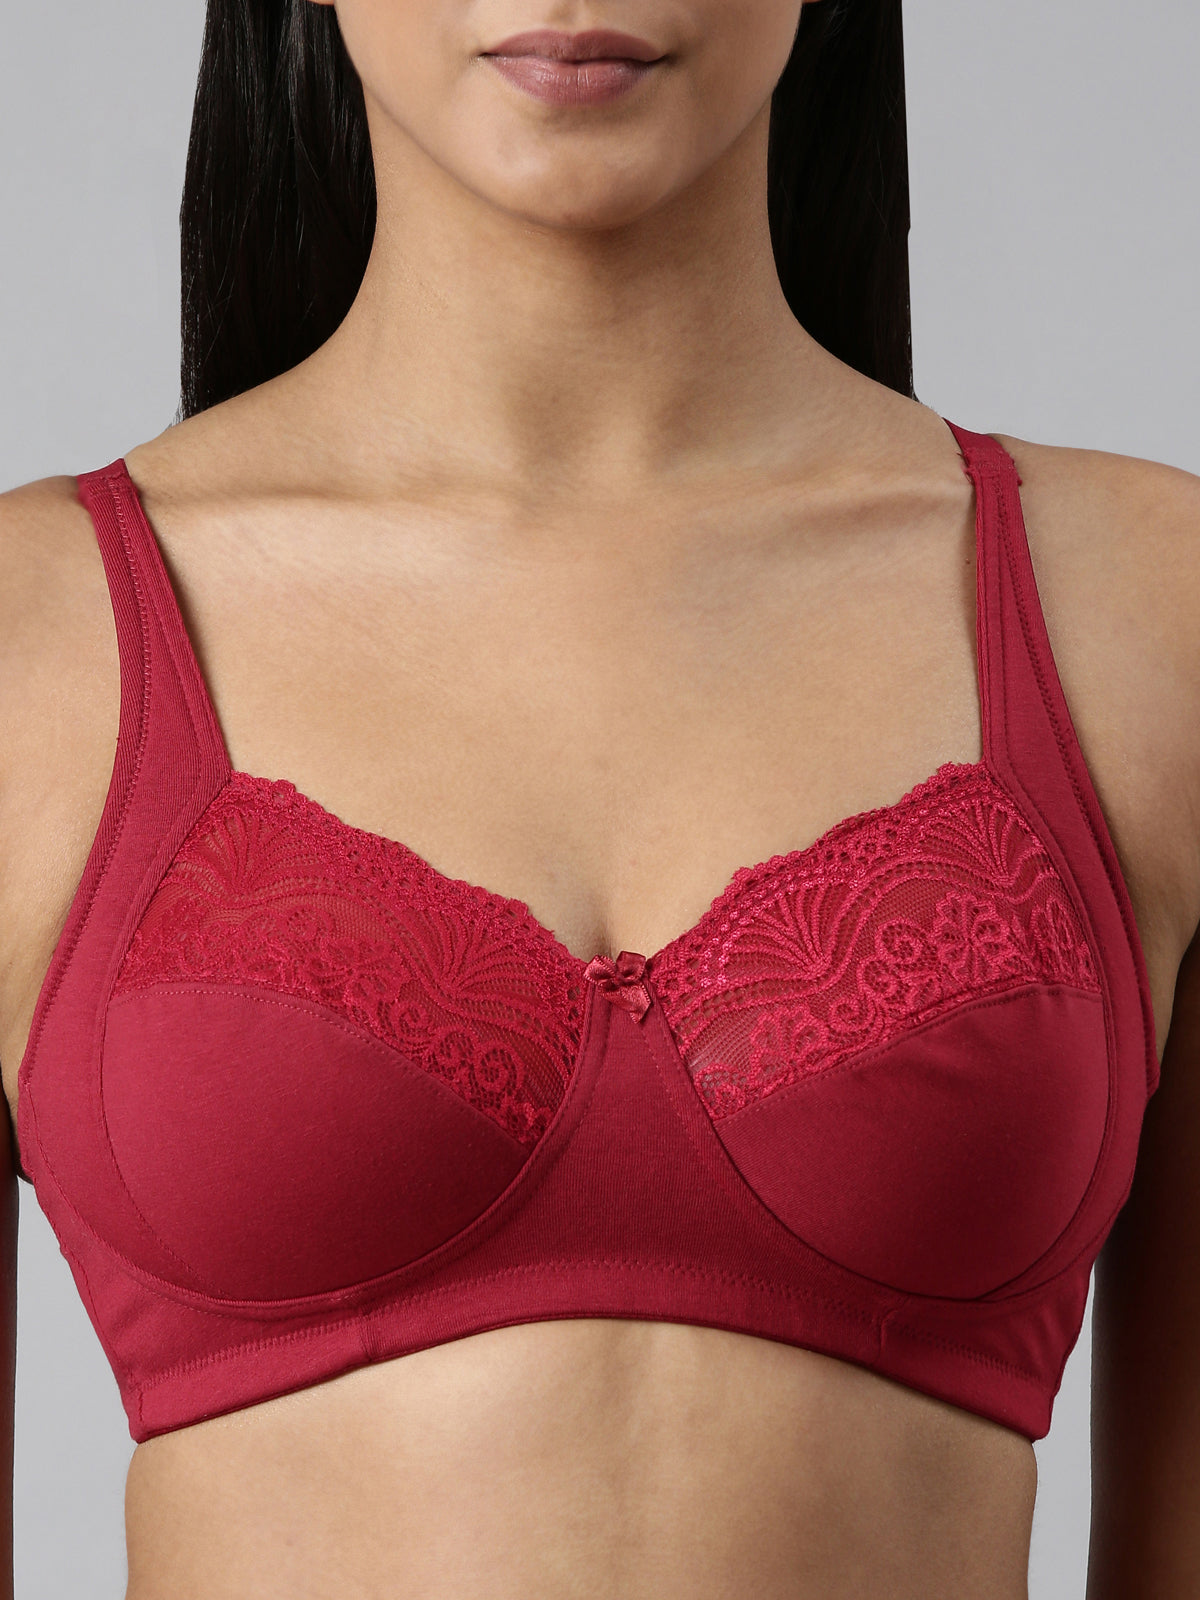 blossom-embrace-red wine2-support bra